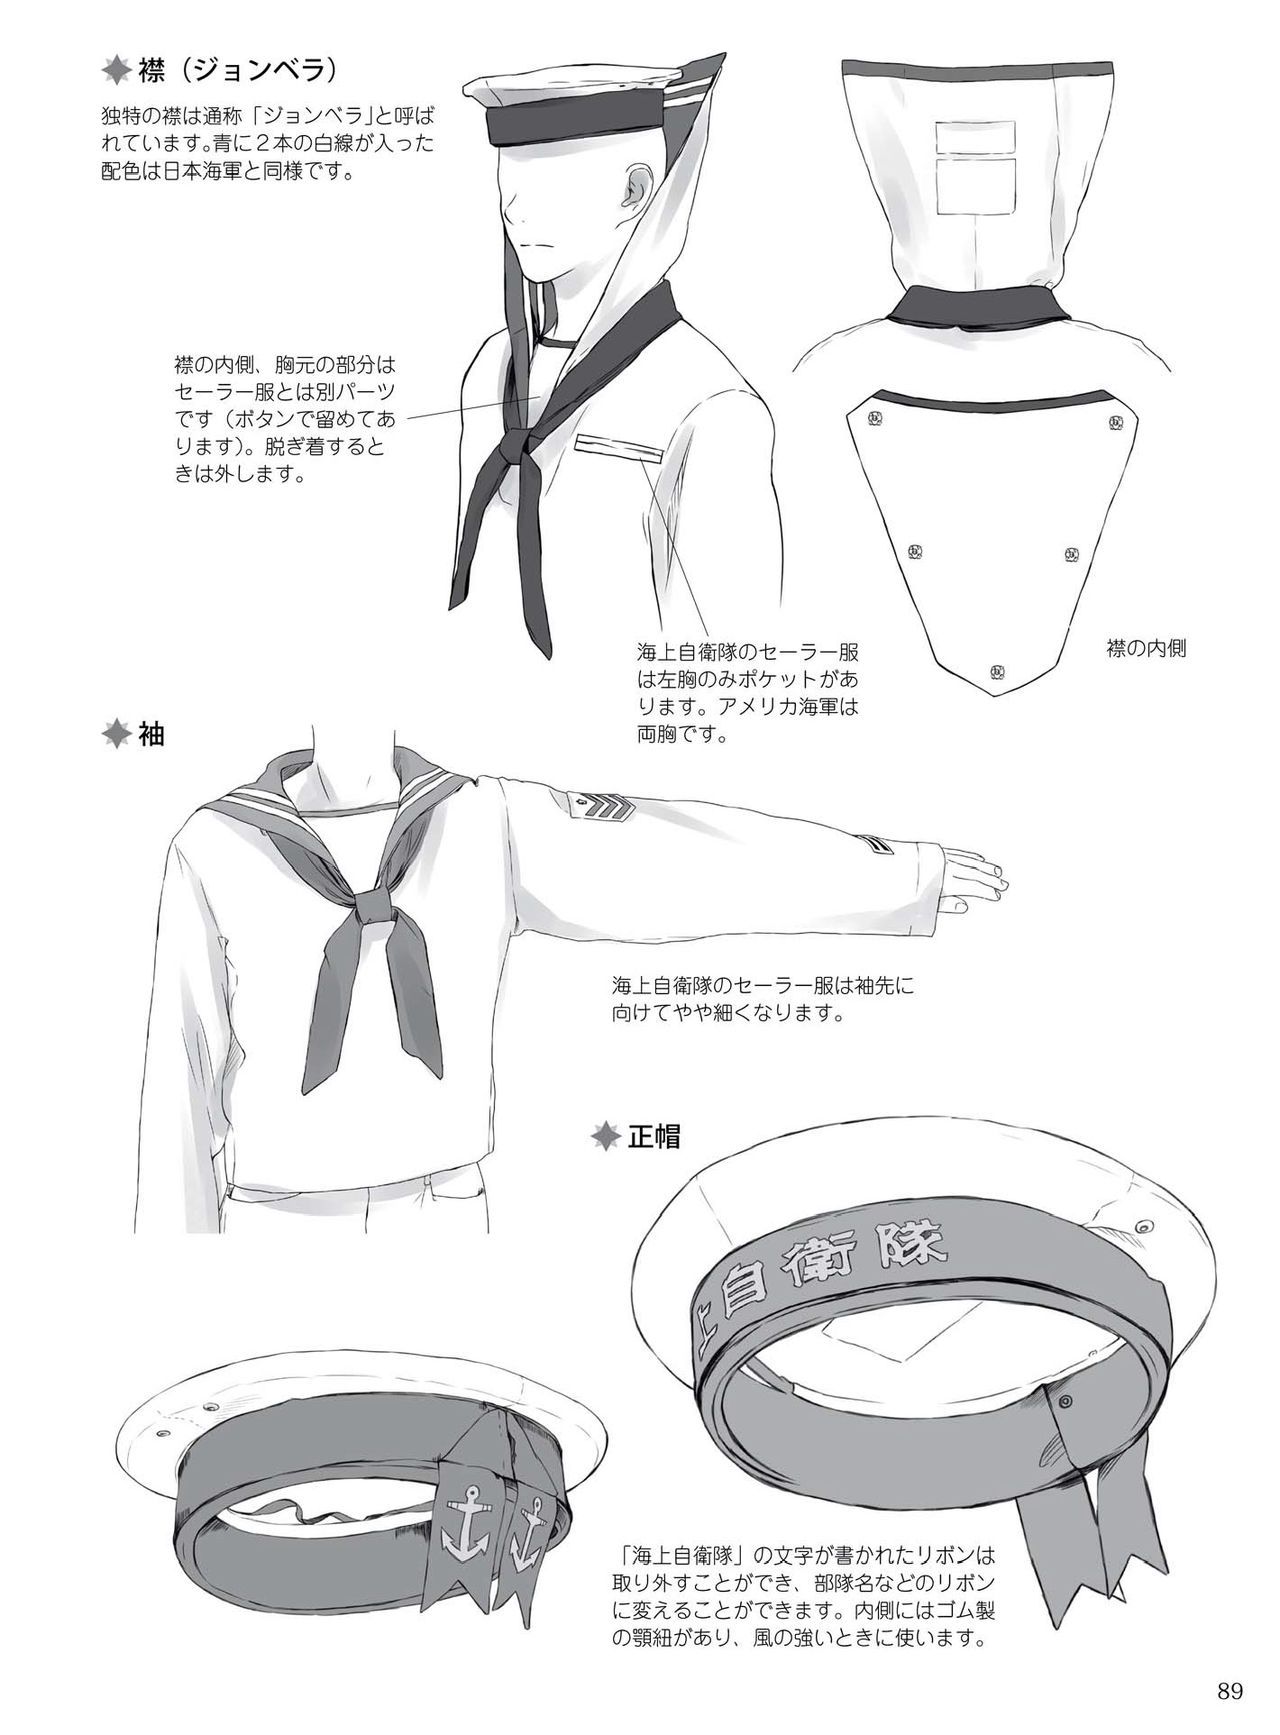 How to draw military uniforms and uniforms From Self-Defense Forces 軍服・制服の描き方 アメリカ軍・自衛隊の制服から戦闘服まで 92